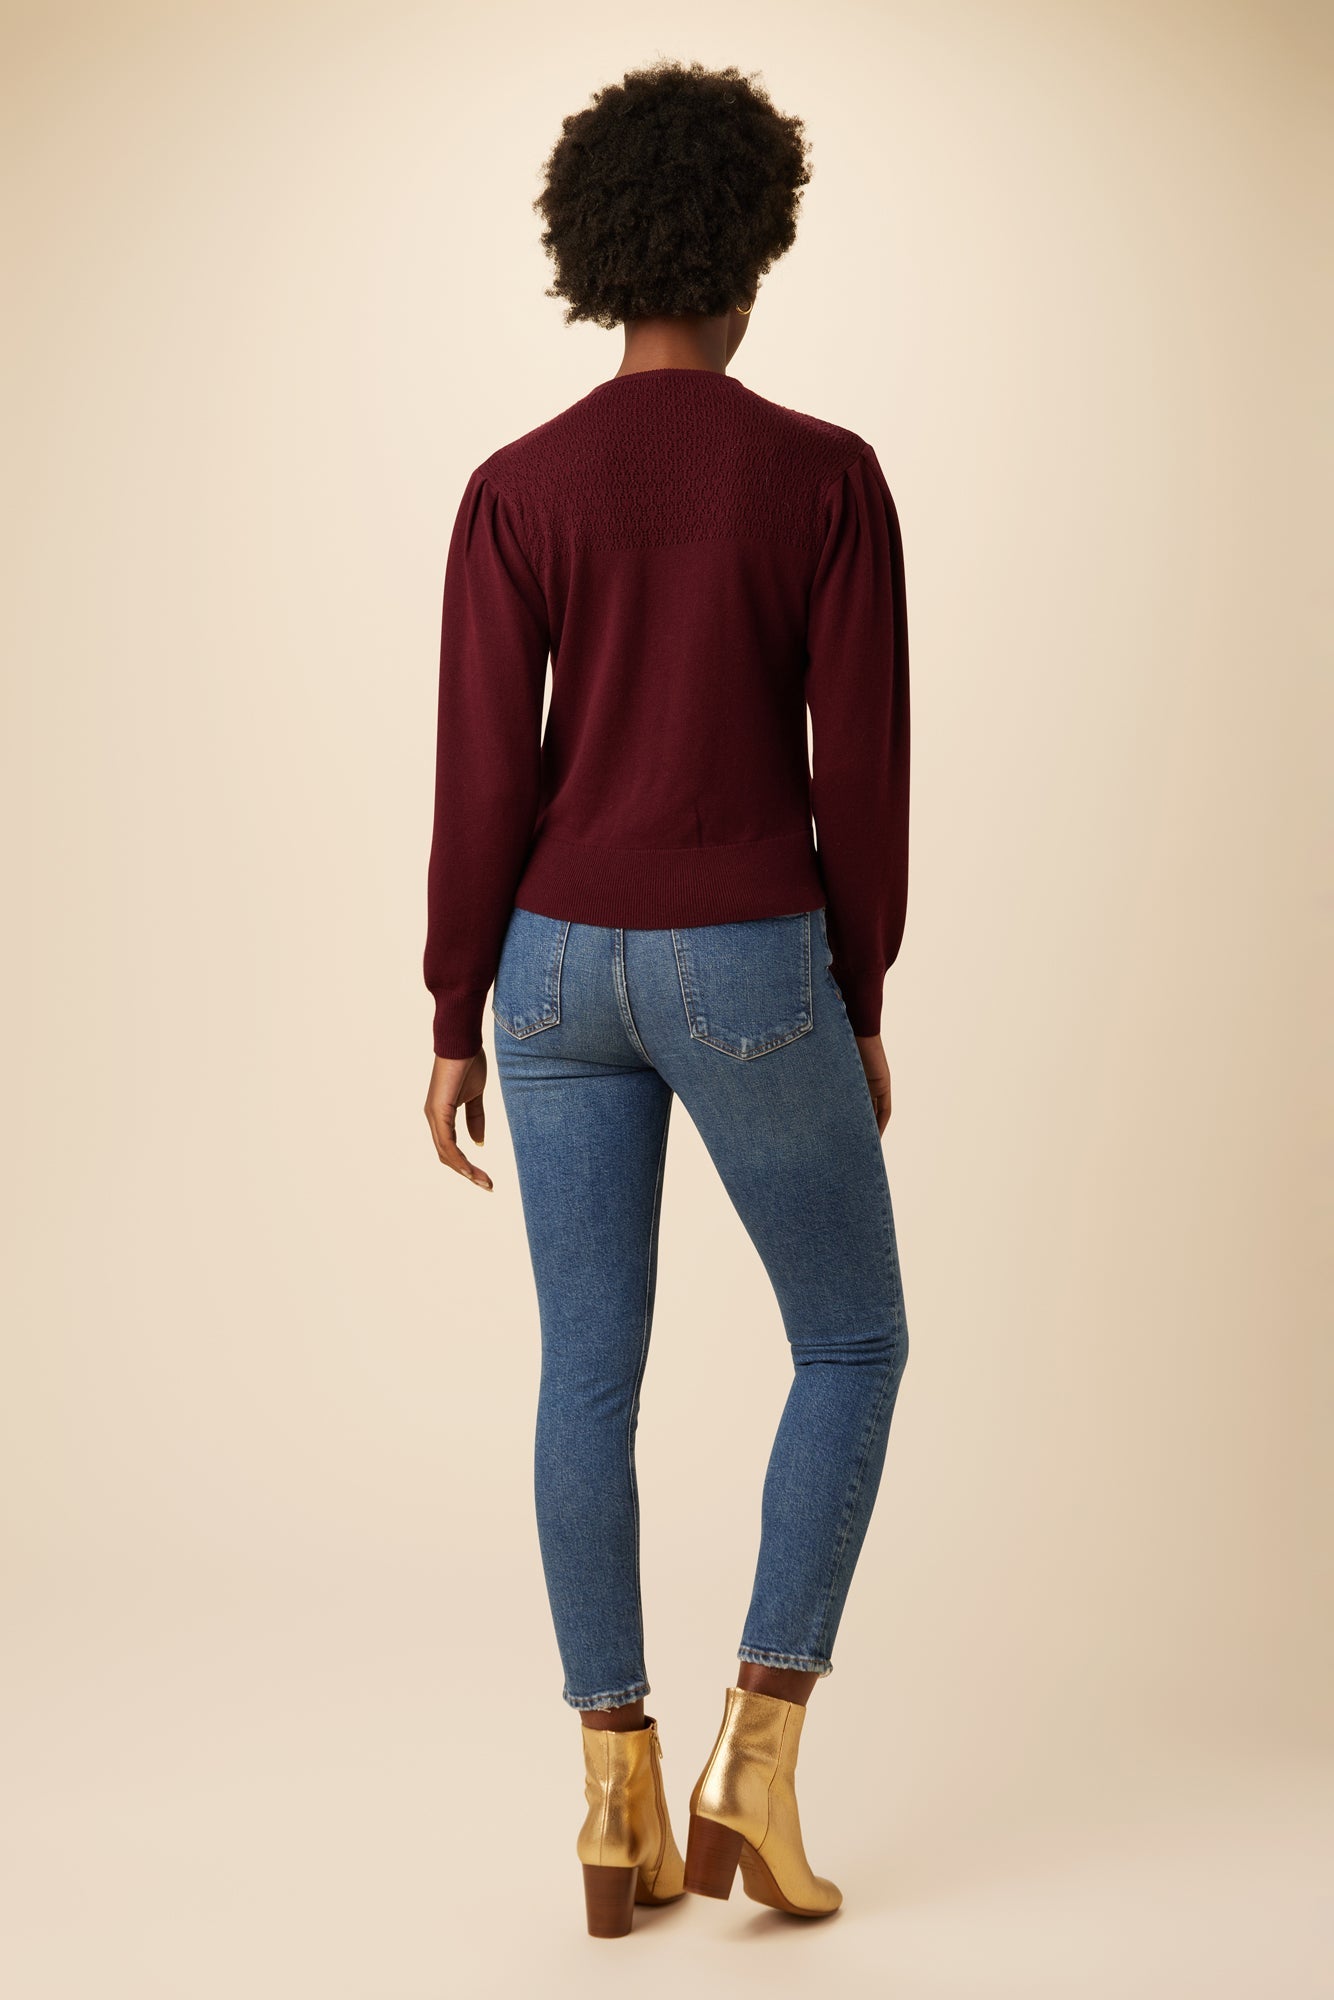 Micah Eco Wool Sweater - Burgundy - ReAmour